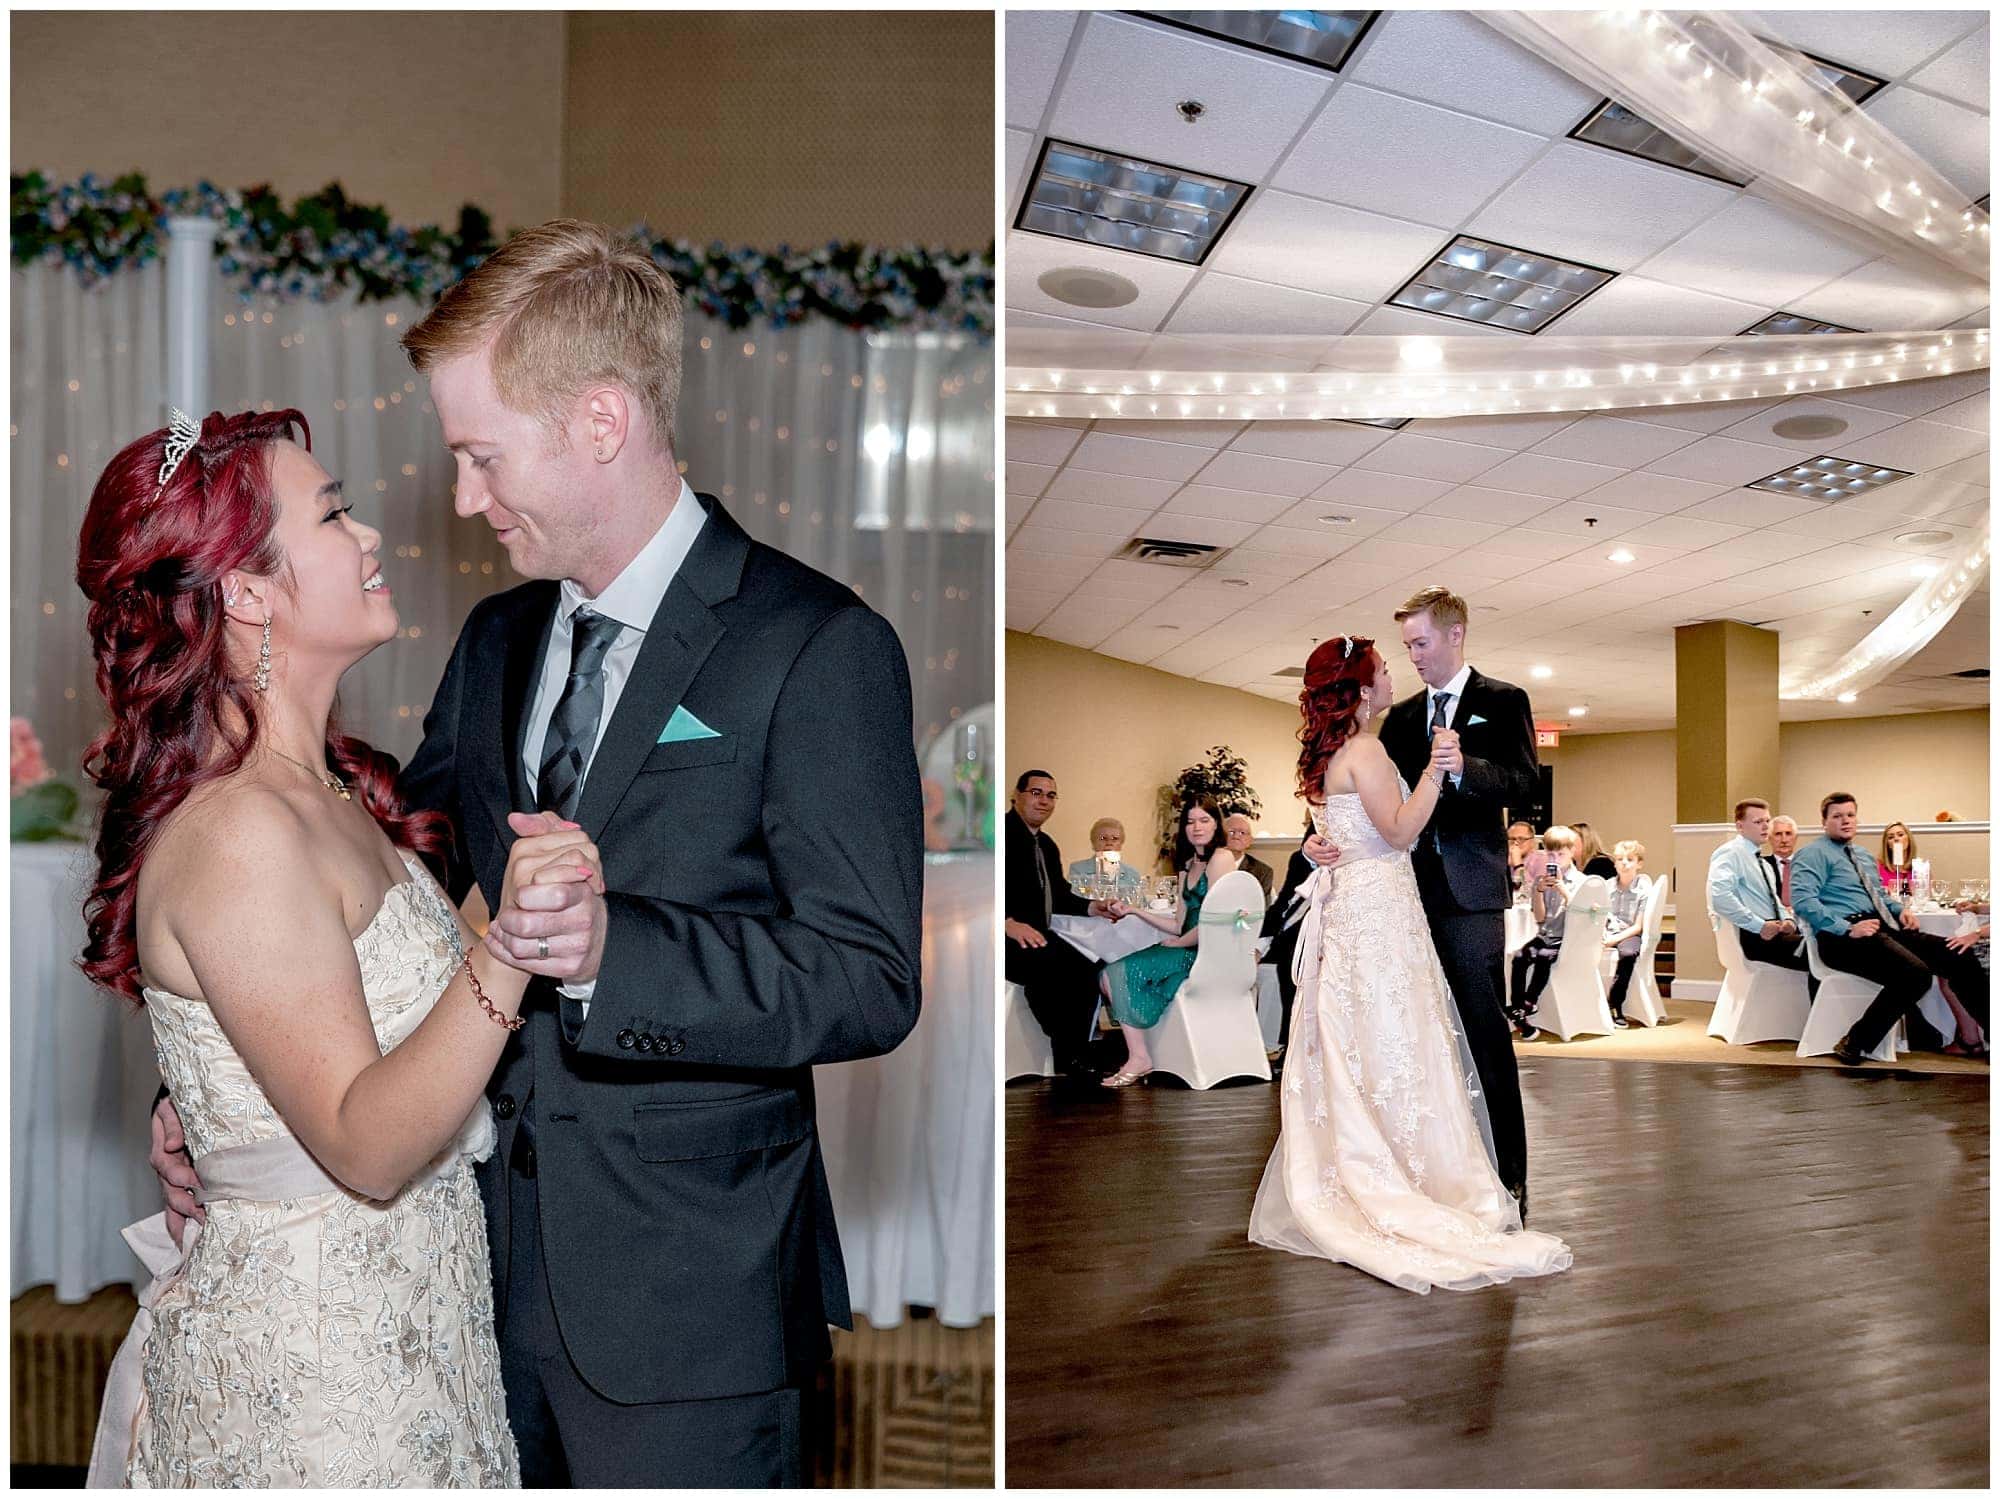 The bride and groom during their first wedding dance at the Atlantica Hotel in Halifax, NS.